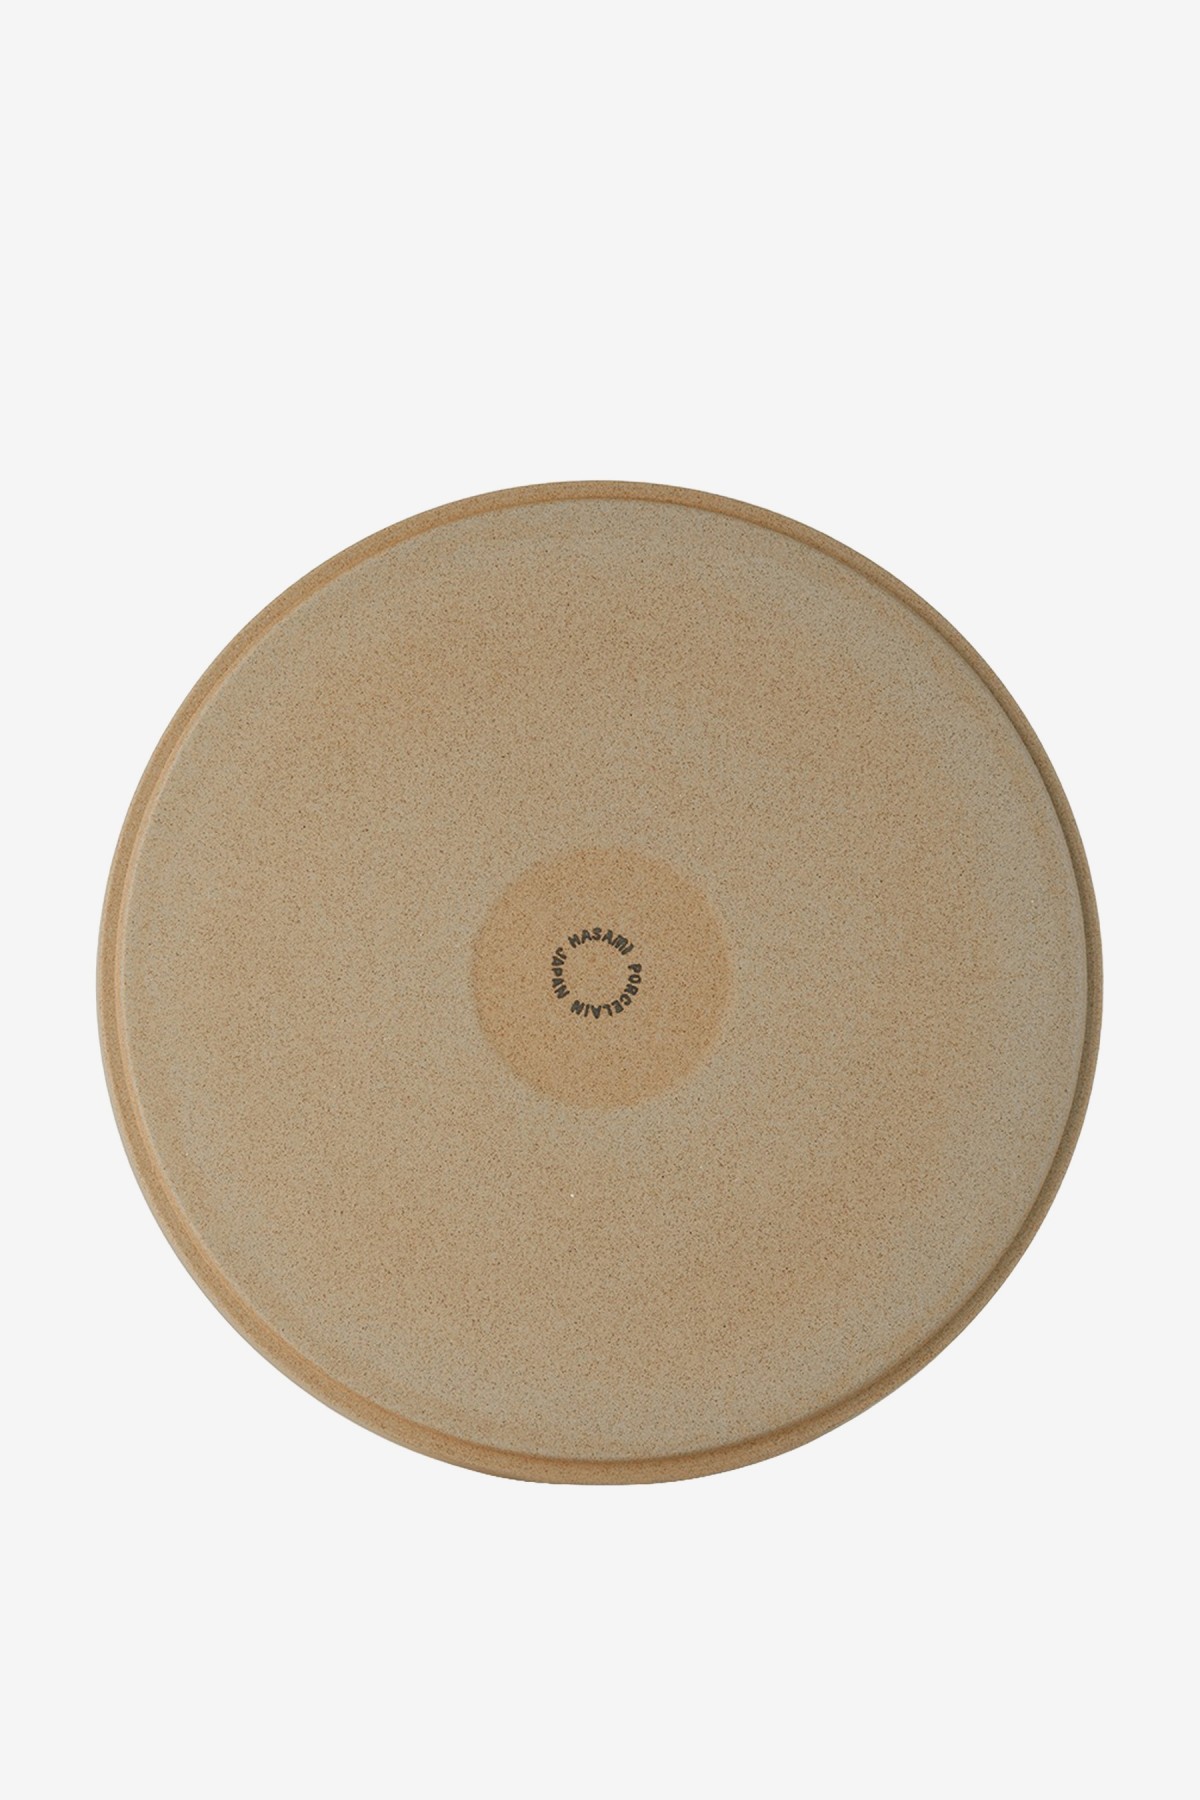 Hasami Porcelain Plate 255 in Sand